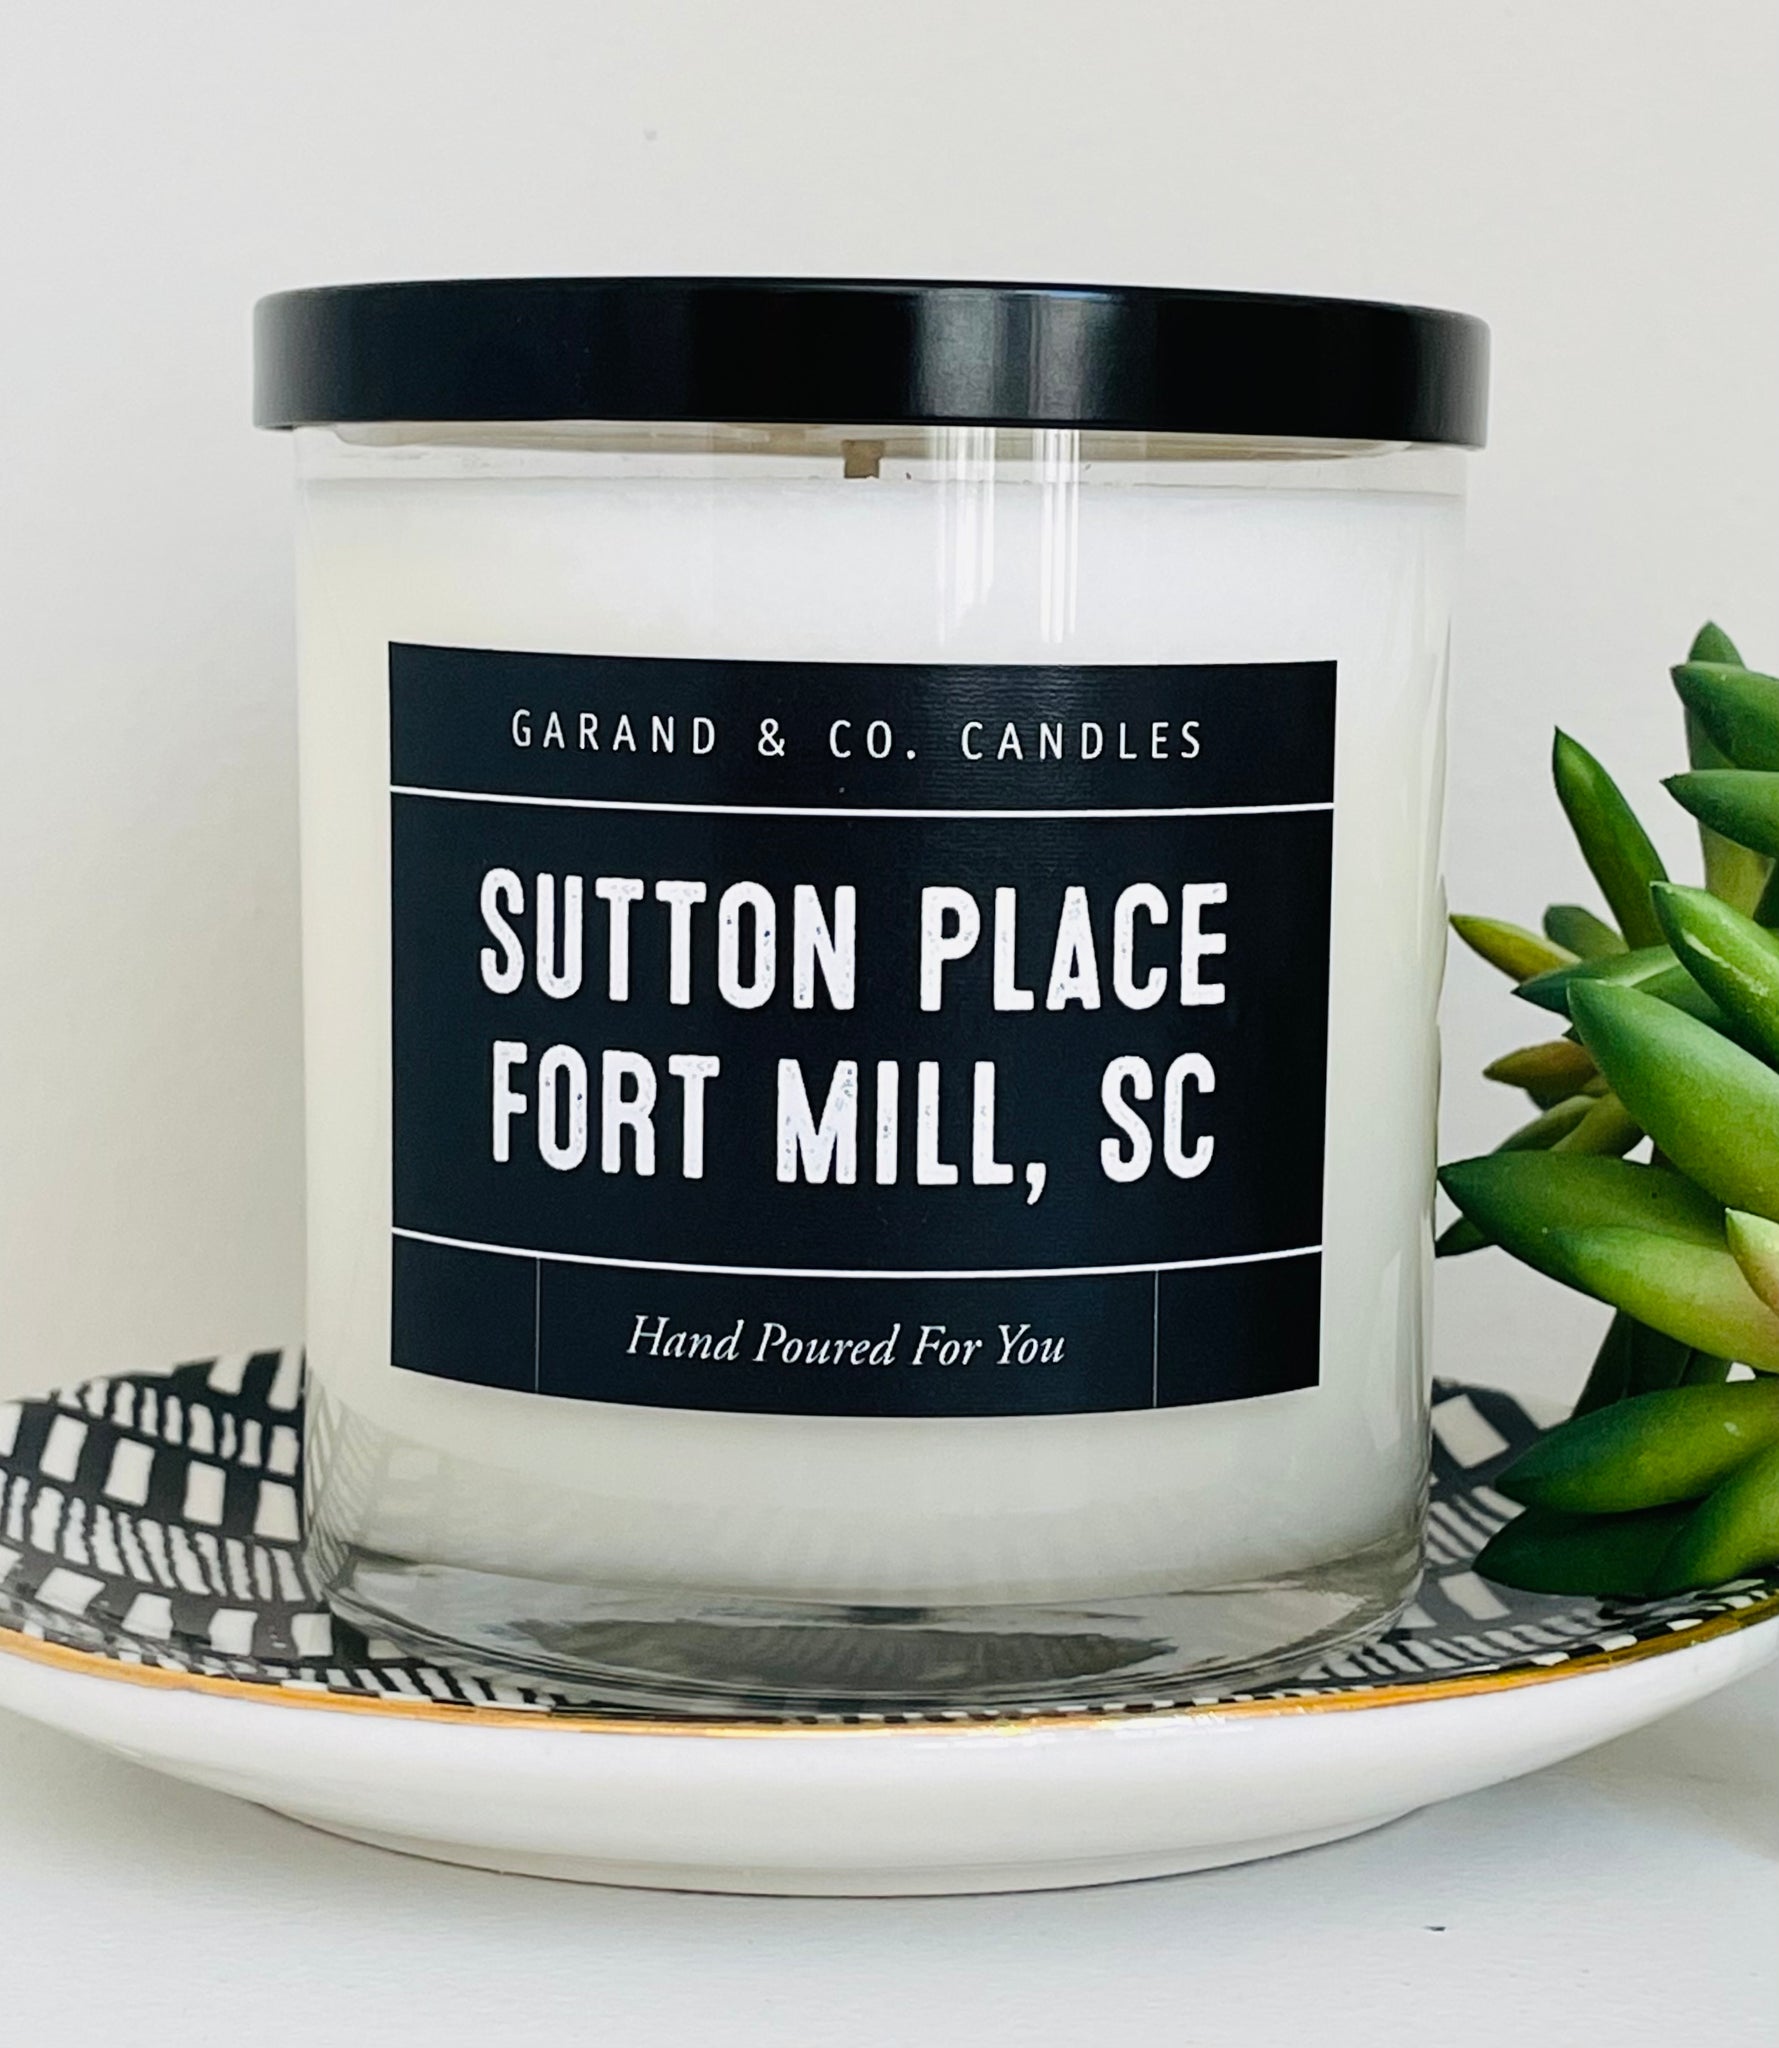 12 oz Clear Glass Jar Candle - Sutton Place Fort Mill, SC